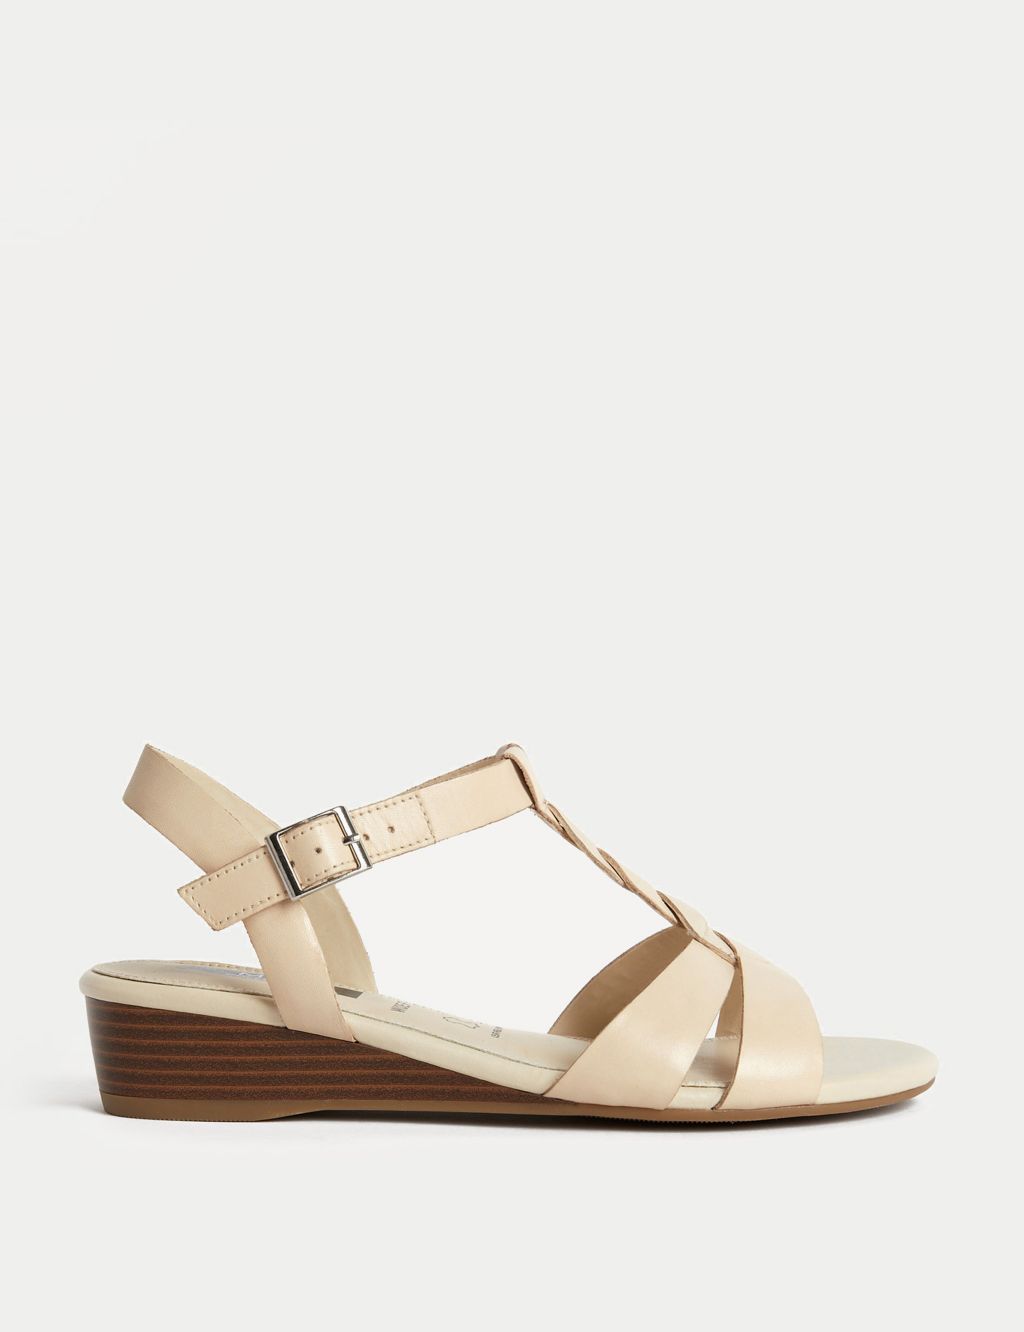 Wide Fit Leather Wedge Sandals Mid image 1